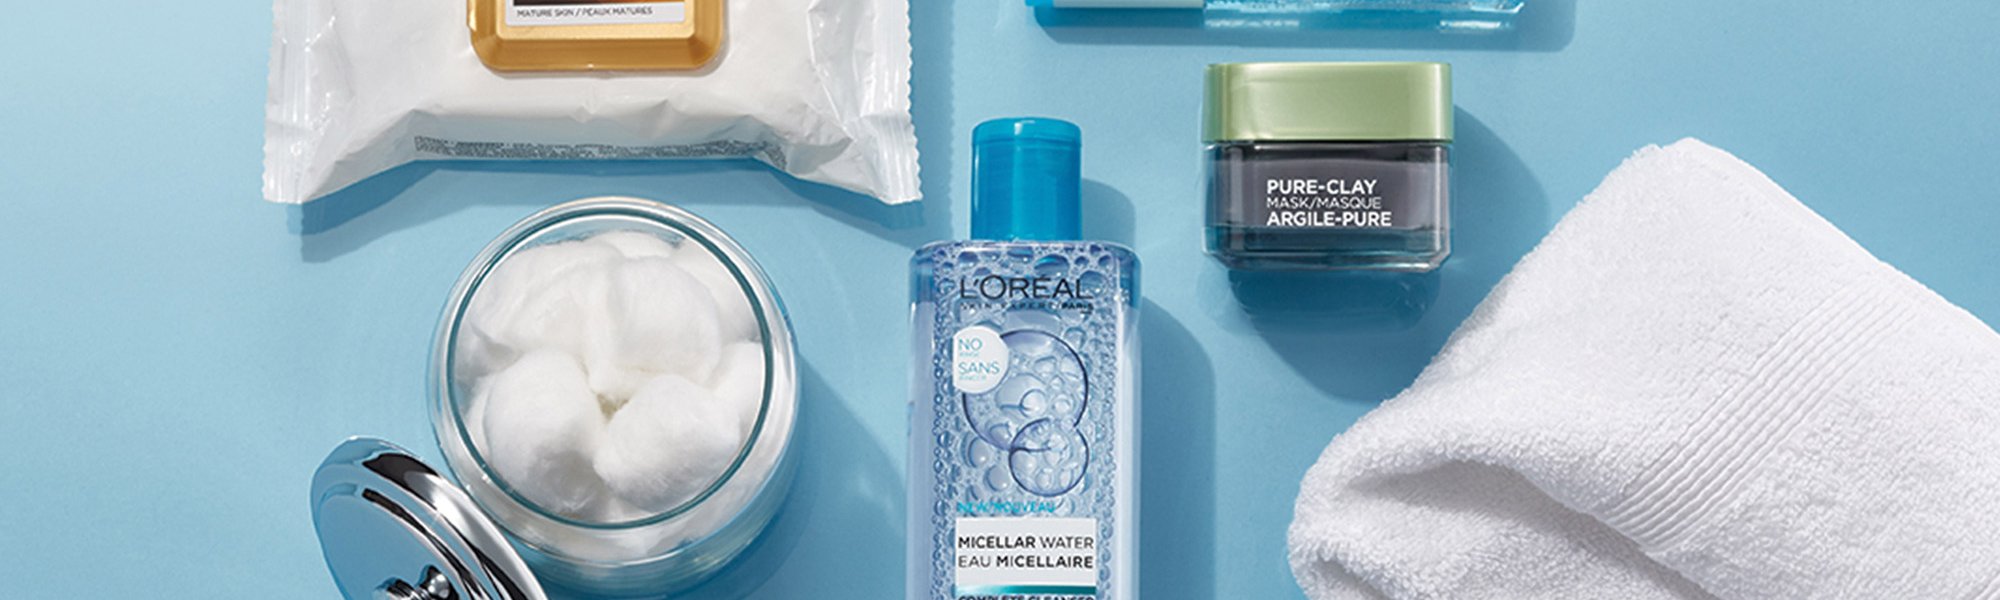 Makeup Remover 101a Formula For Every Skin Care Routine And Skin Type